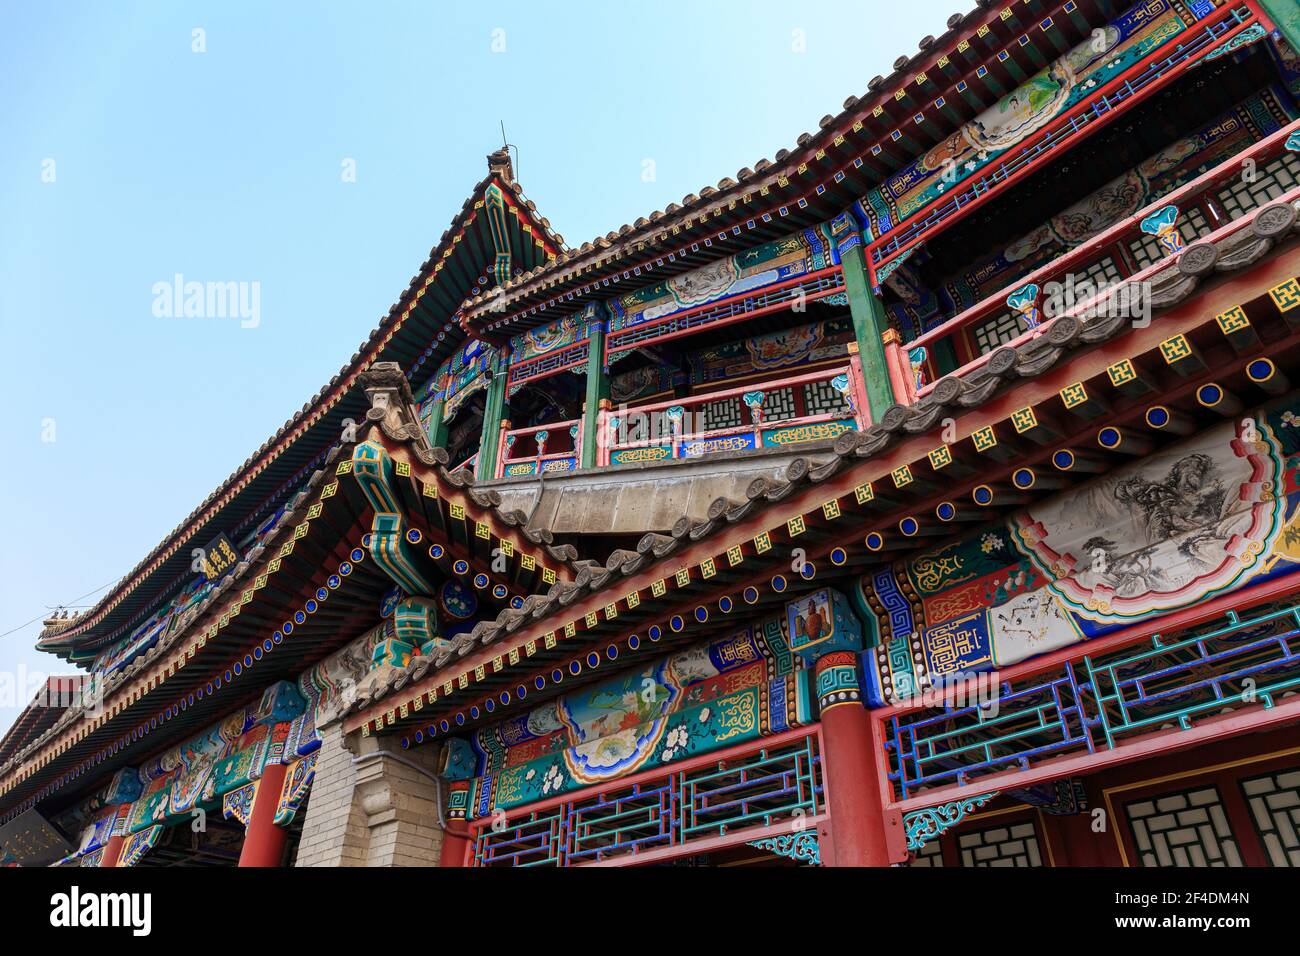 Beautiful traditional Qing-era Chinese architecture at Behai park in Beijing, China in May 2018 Stock Photo